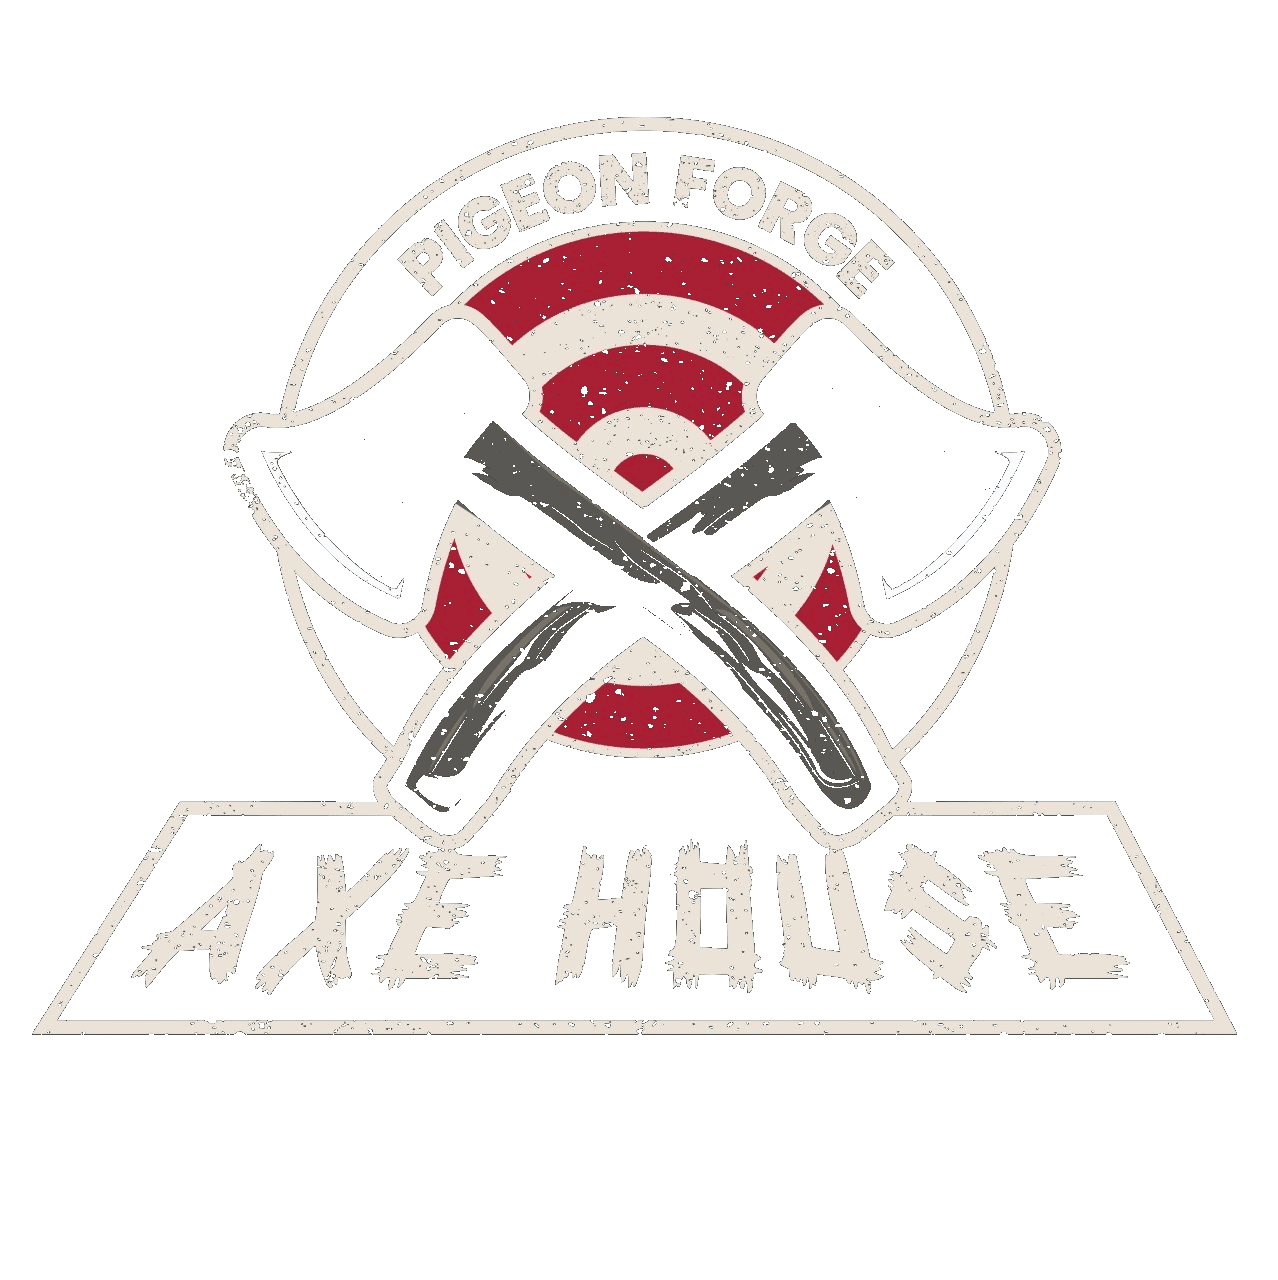 Pigeon Forge Axe House